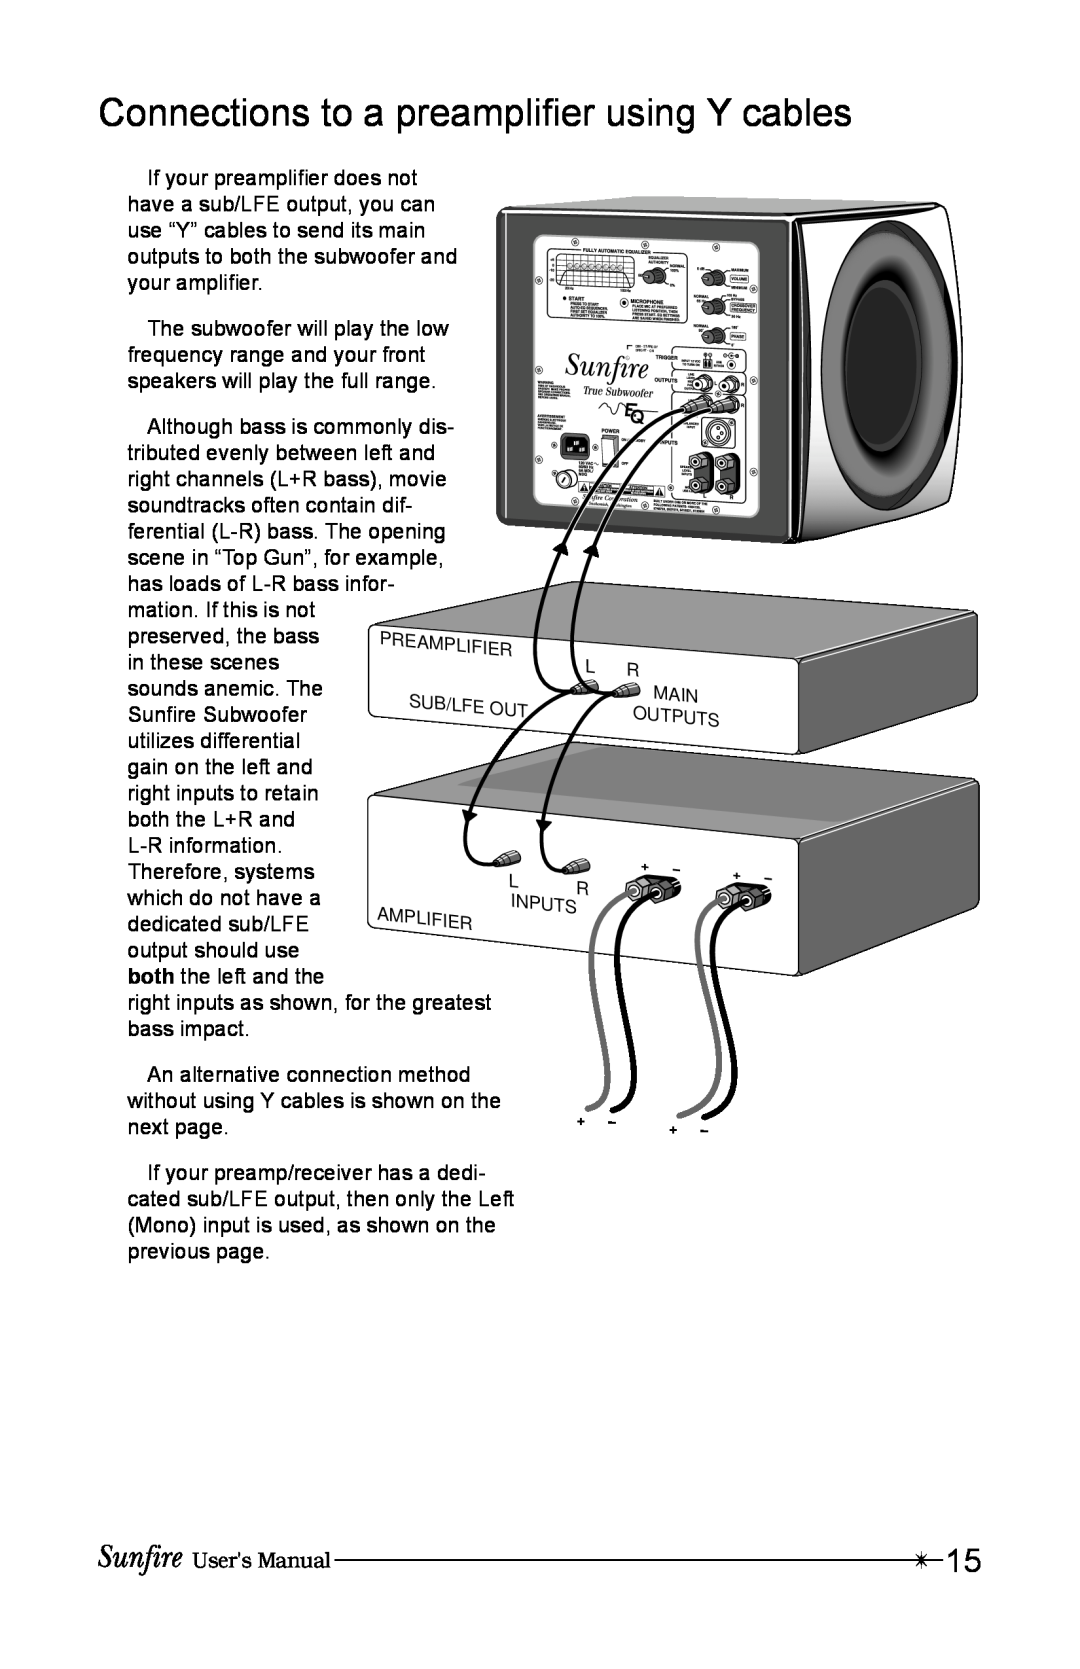 Sunfire True Subwoofer Signature and Standard Version user manual Connections to a preampliÞer using Y cables 